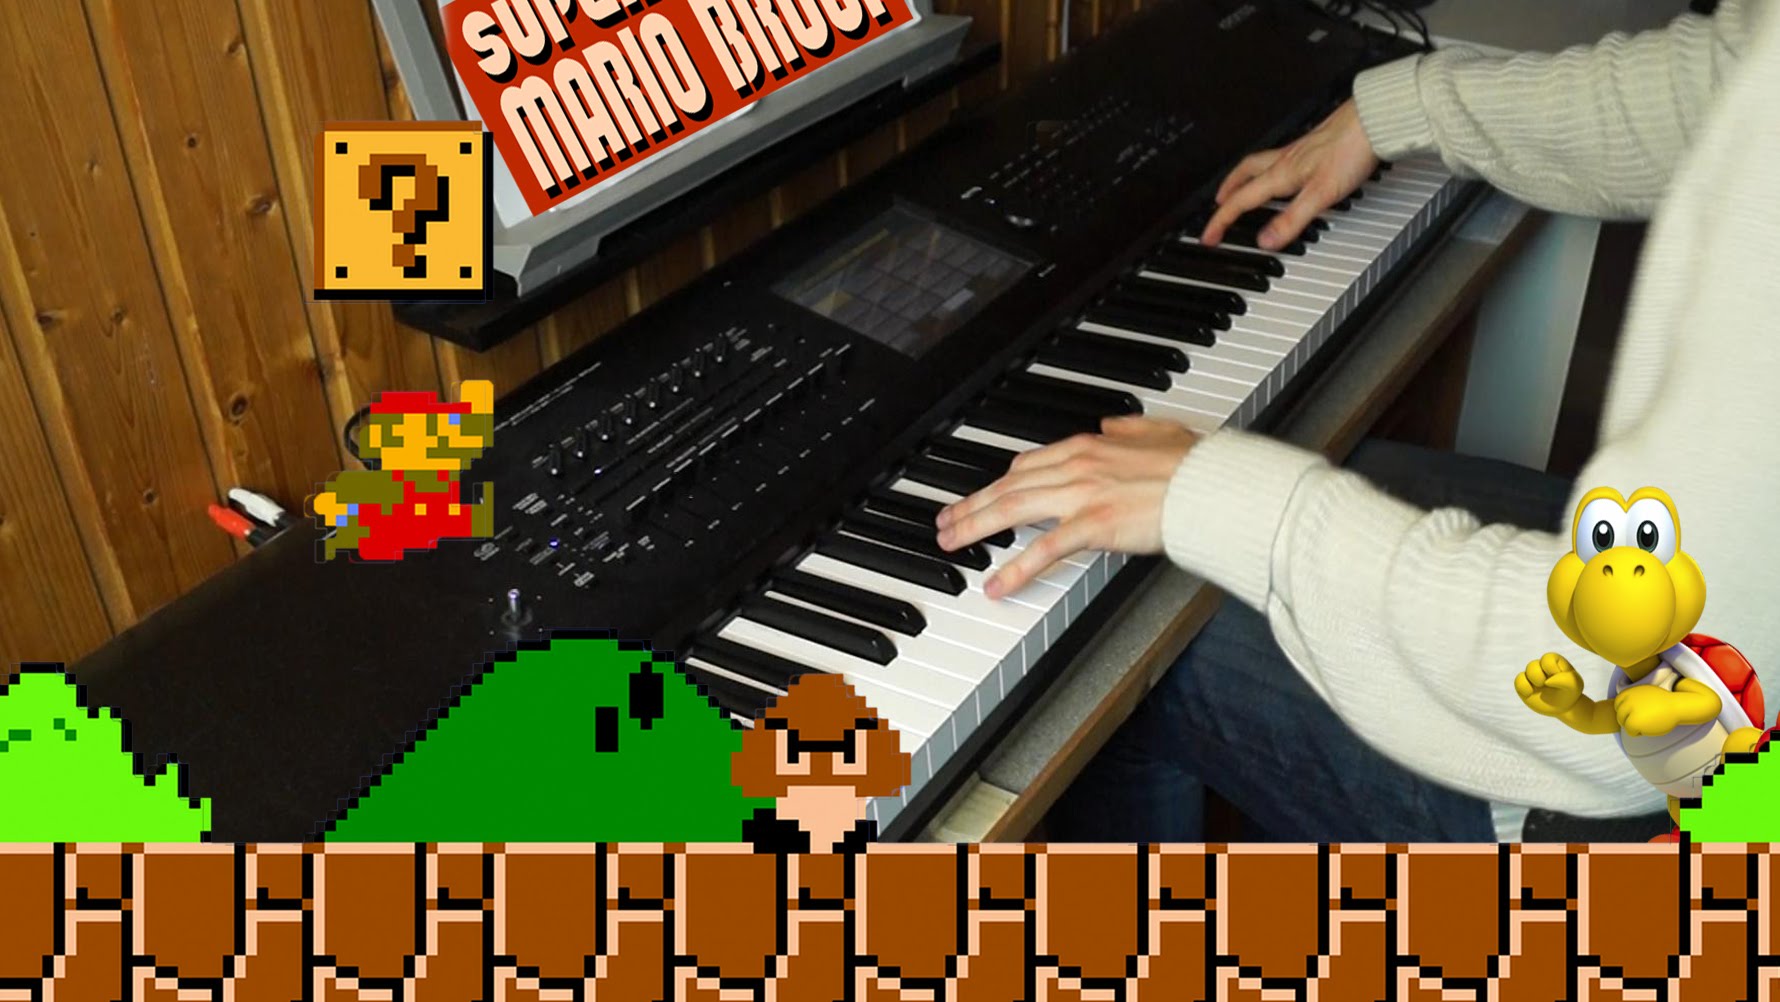 Super Mario 3 Piano. Super Mario 64 Mad Piano. Super Mario brothers Bowlser playing the Piano Video download.